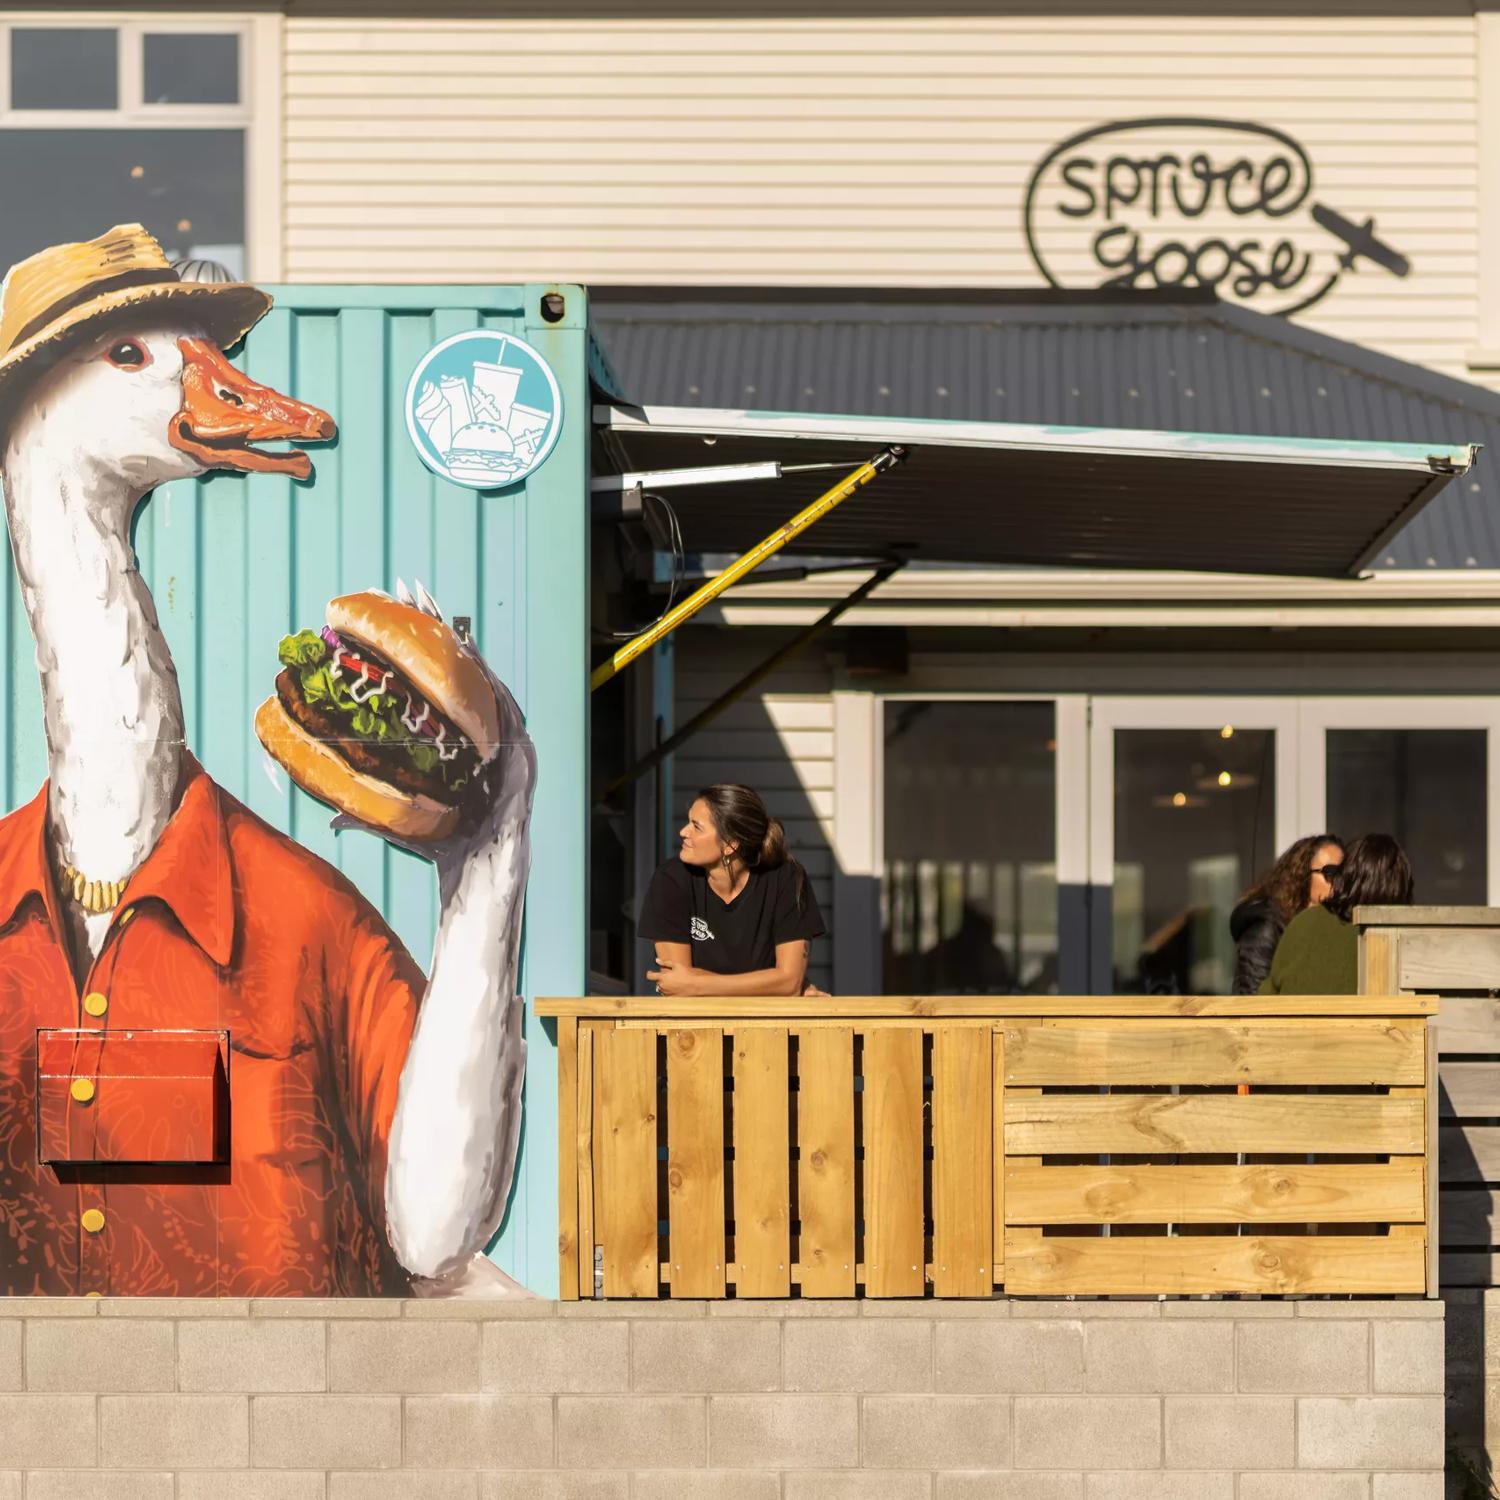 The exterior of Spruce Goose, with people sitting on the outside tables and a mural of a large goose with a surfboard eating a burger.